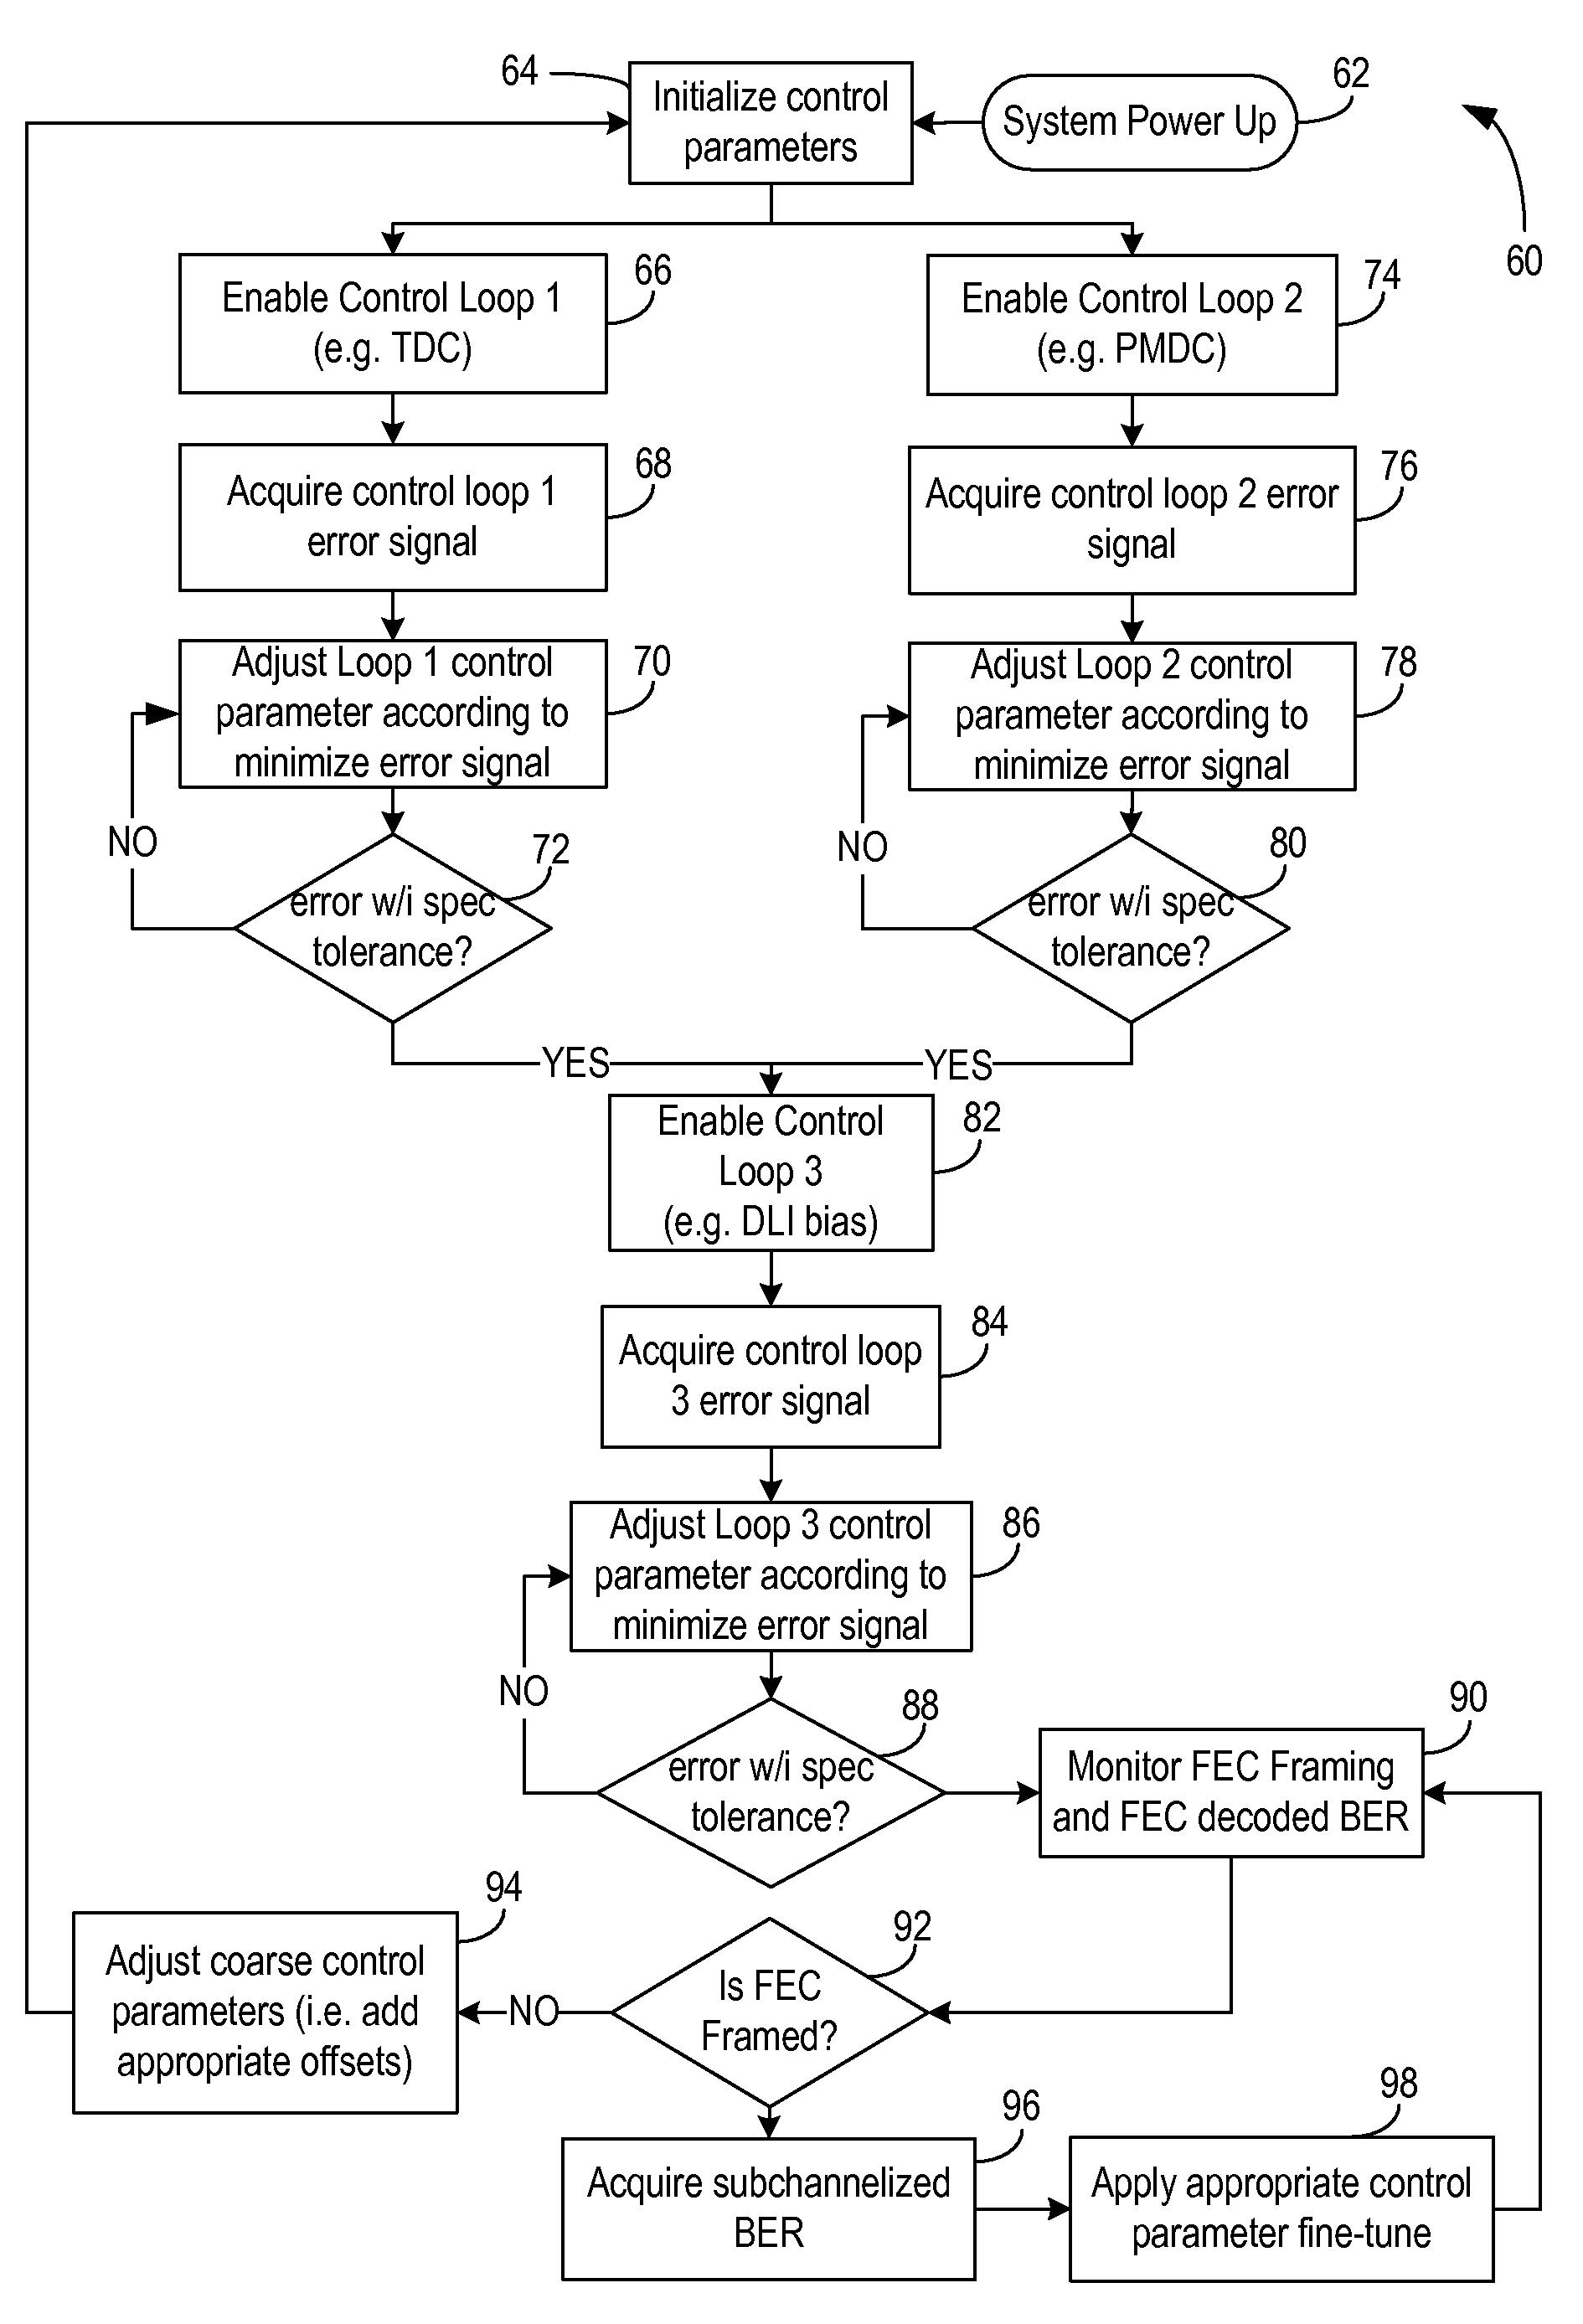 Systems and methods for communication system control utilizing corrected forward error correction error location identifiers